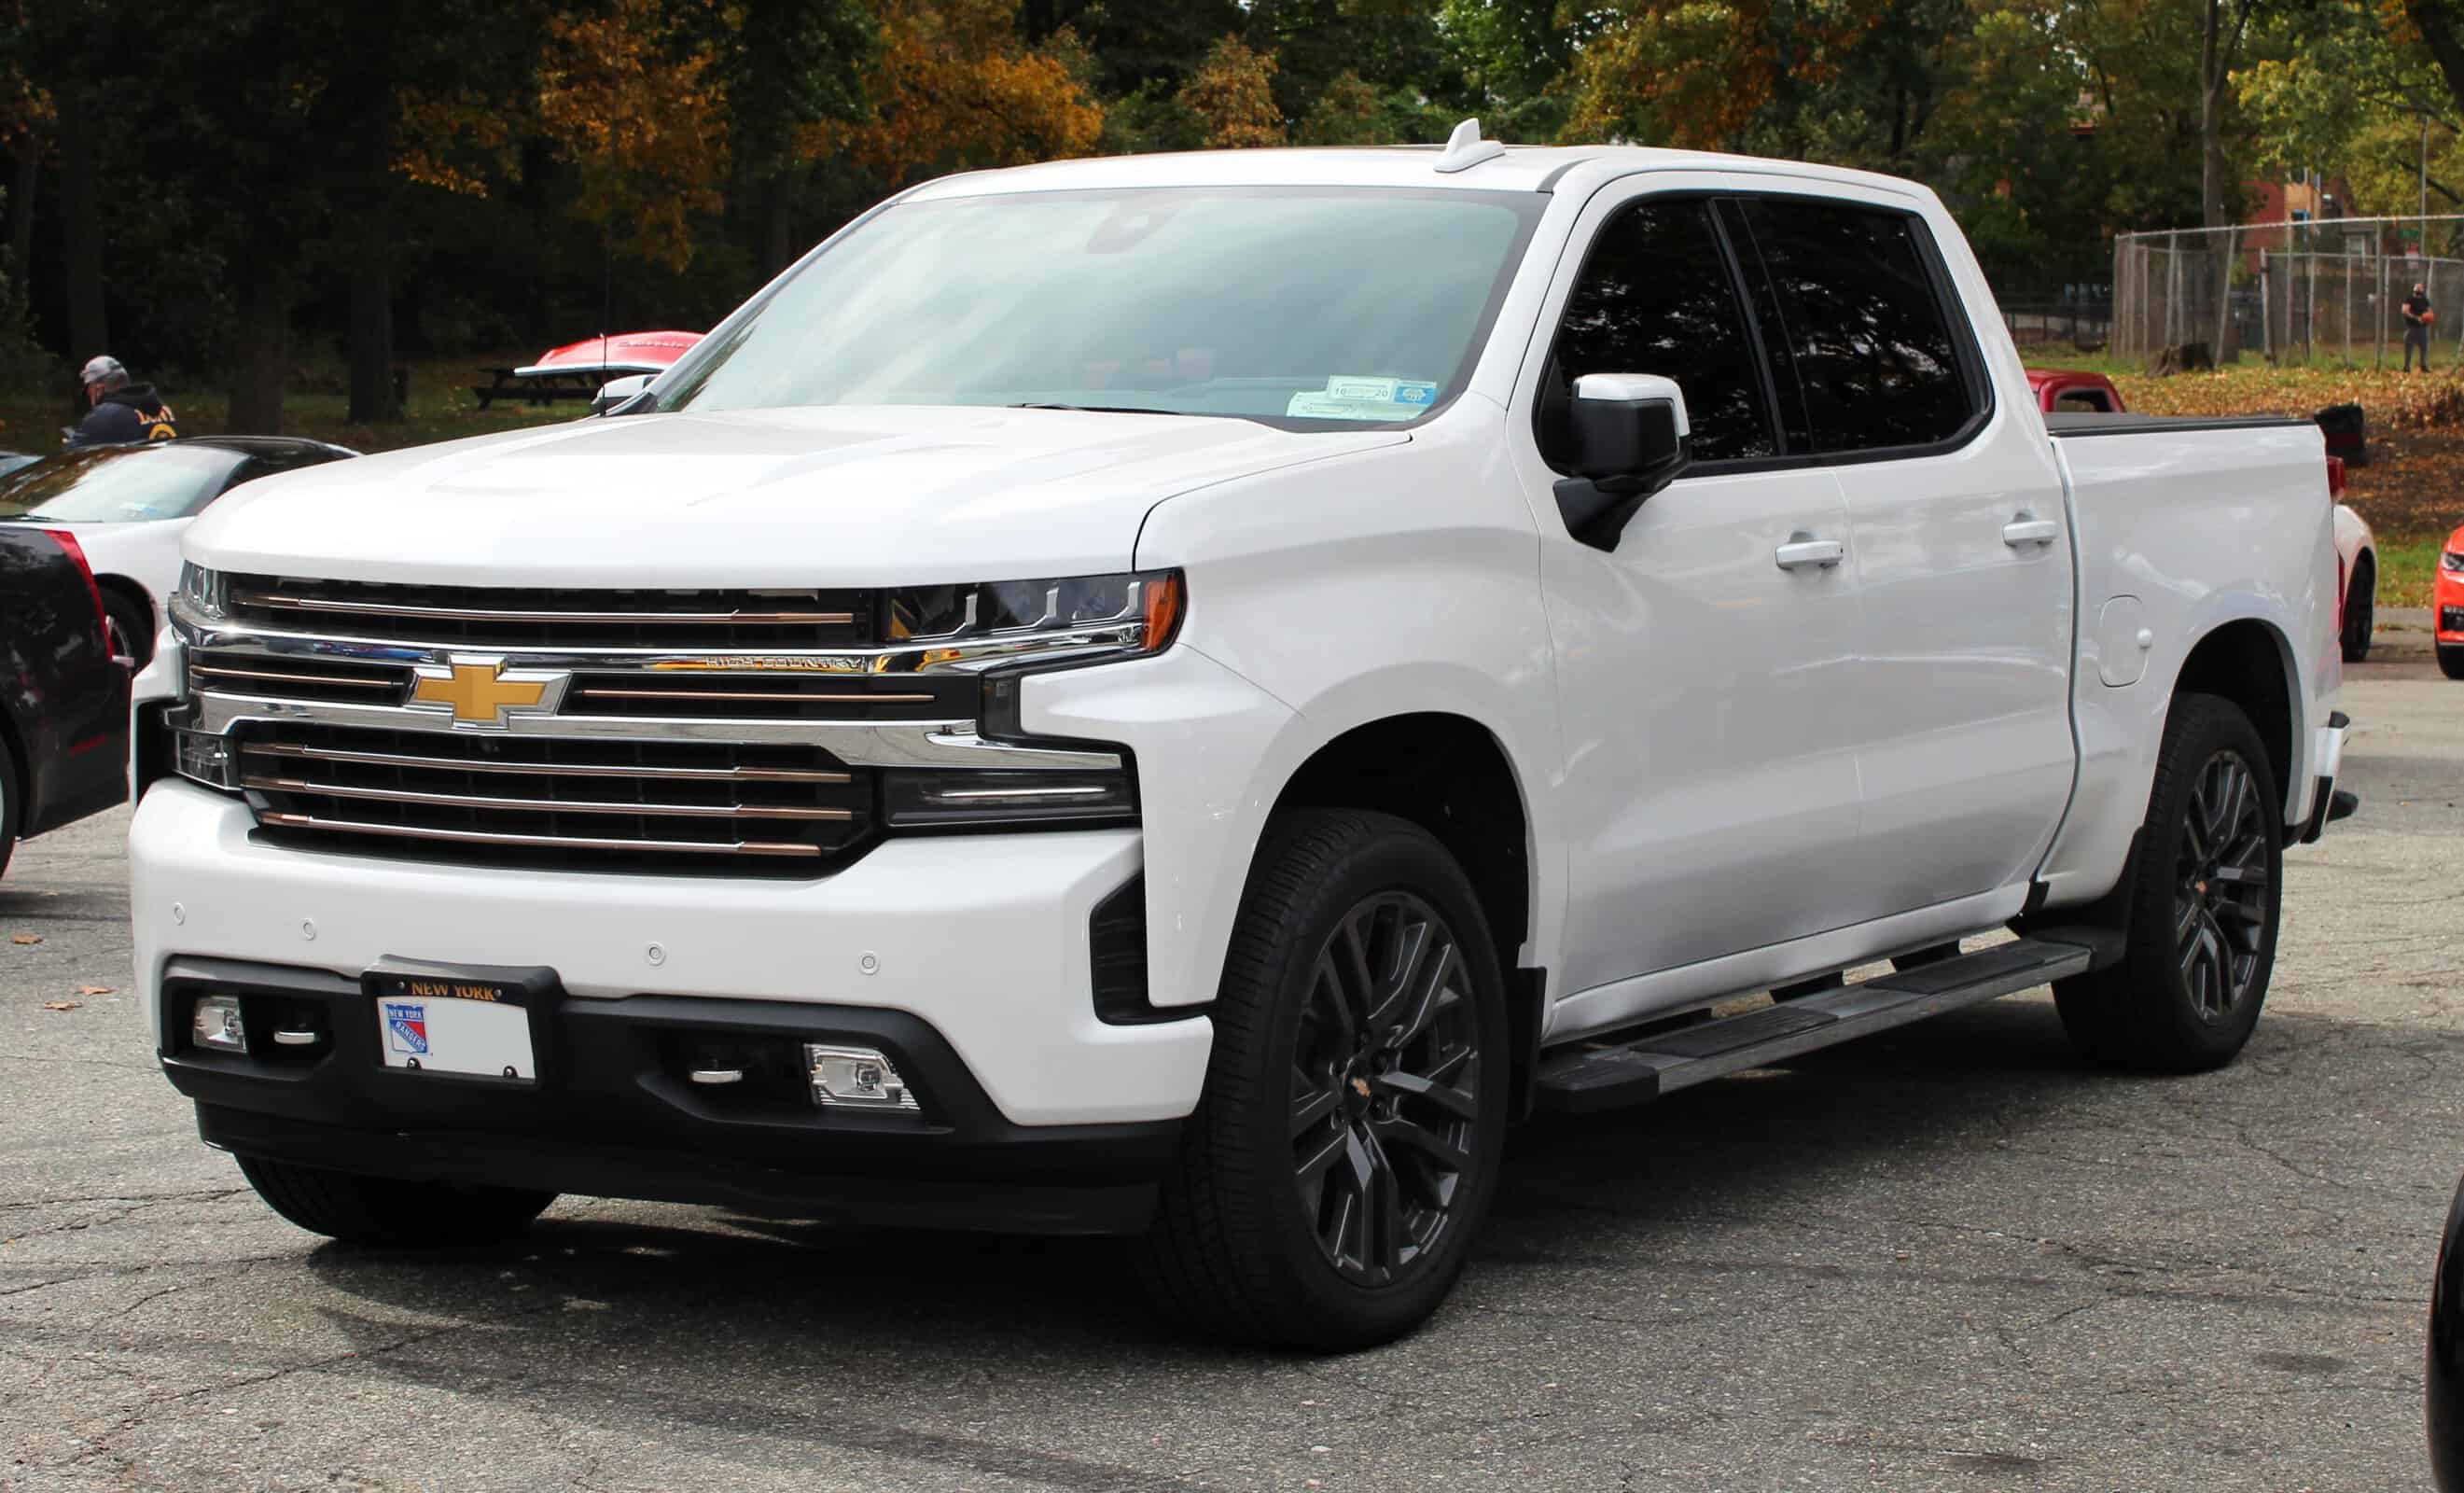 2020 Chevrolet Silverado 1500 High Country, front 10.25.20 by Kevauto